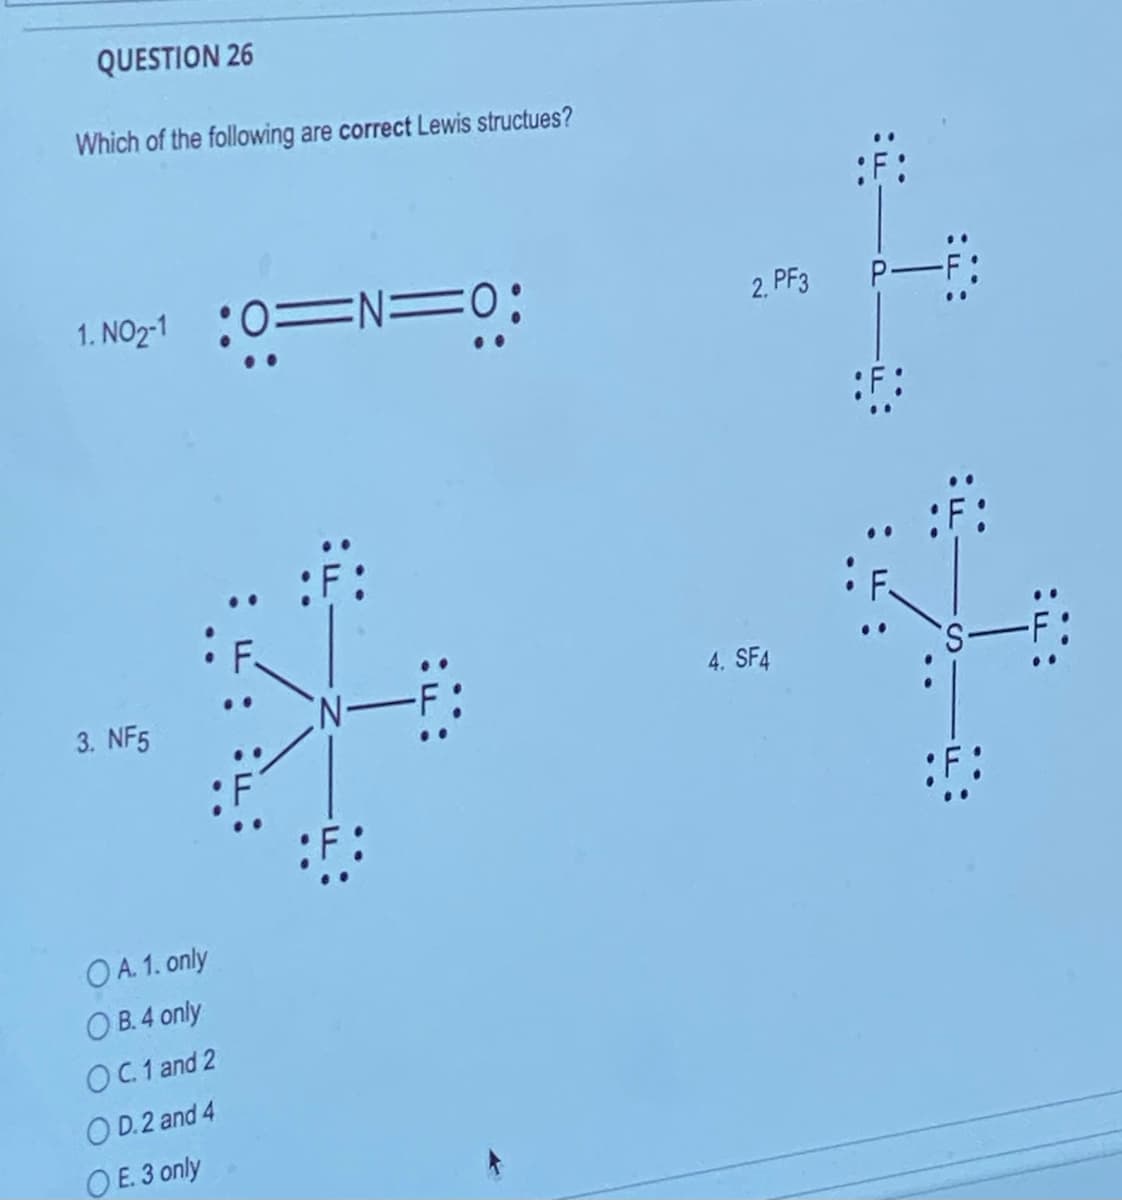 QUESTION 26
Which of the following are correct Lewis structues?
1. NO2-10=N=
3. NF5
OA. 1. only
OB. 4 only
OC. 1 and 2
OD.2 and 4
OE. 3 only
:F:
2. PF3
4. SF4